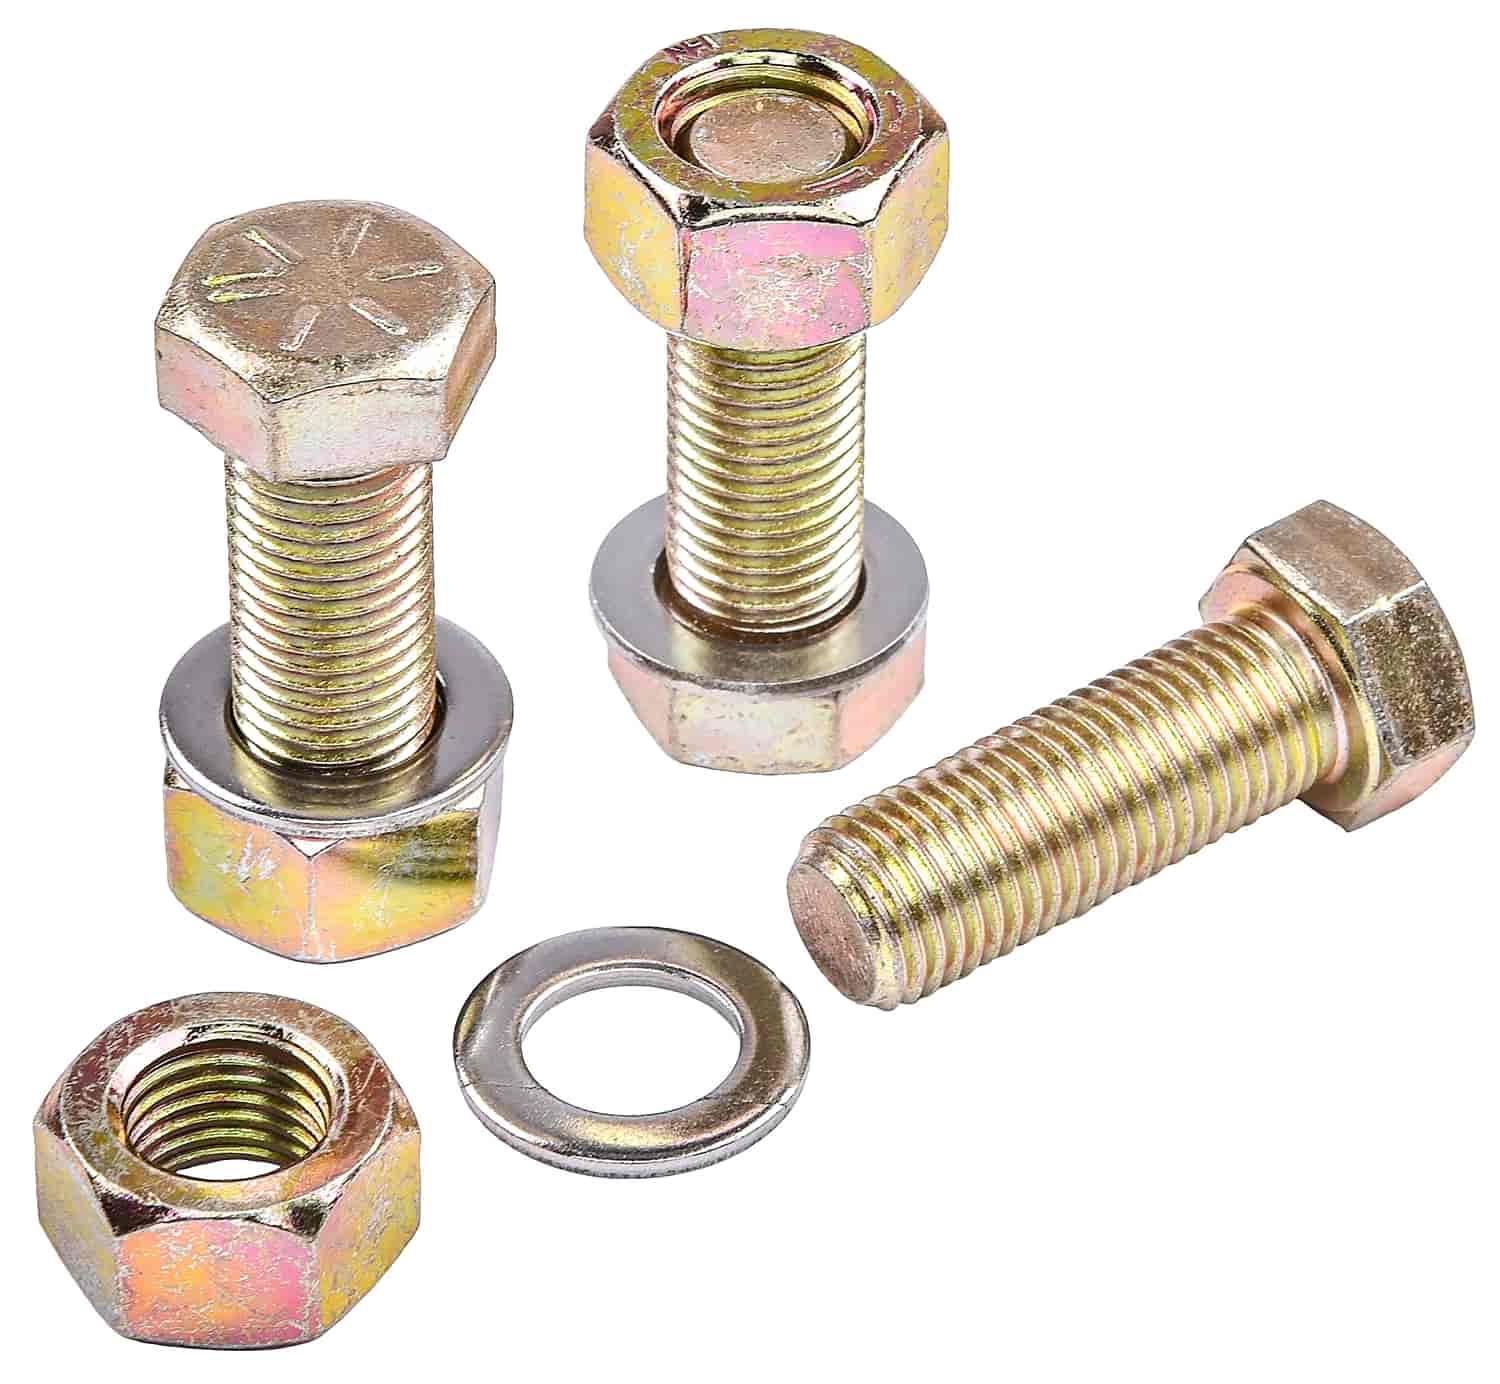 JEGS 555-82503: Torque Converter Bolts | Fits 8 in. Diameter Race  Converters | Grade 8 | Includes (3) 7/16 in.-20 x 1 1/4 in. UHL Bolts, (3)  7/16 in.-20 Hex Nuts & (3) 7/16 in. Stainless Steel Washers - JEGS